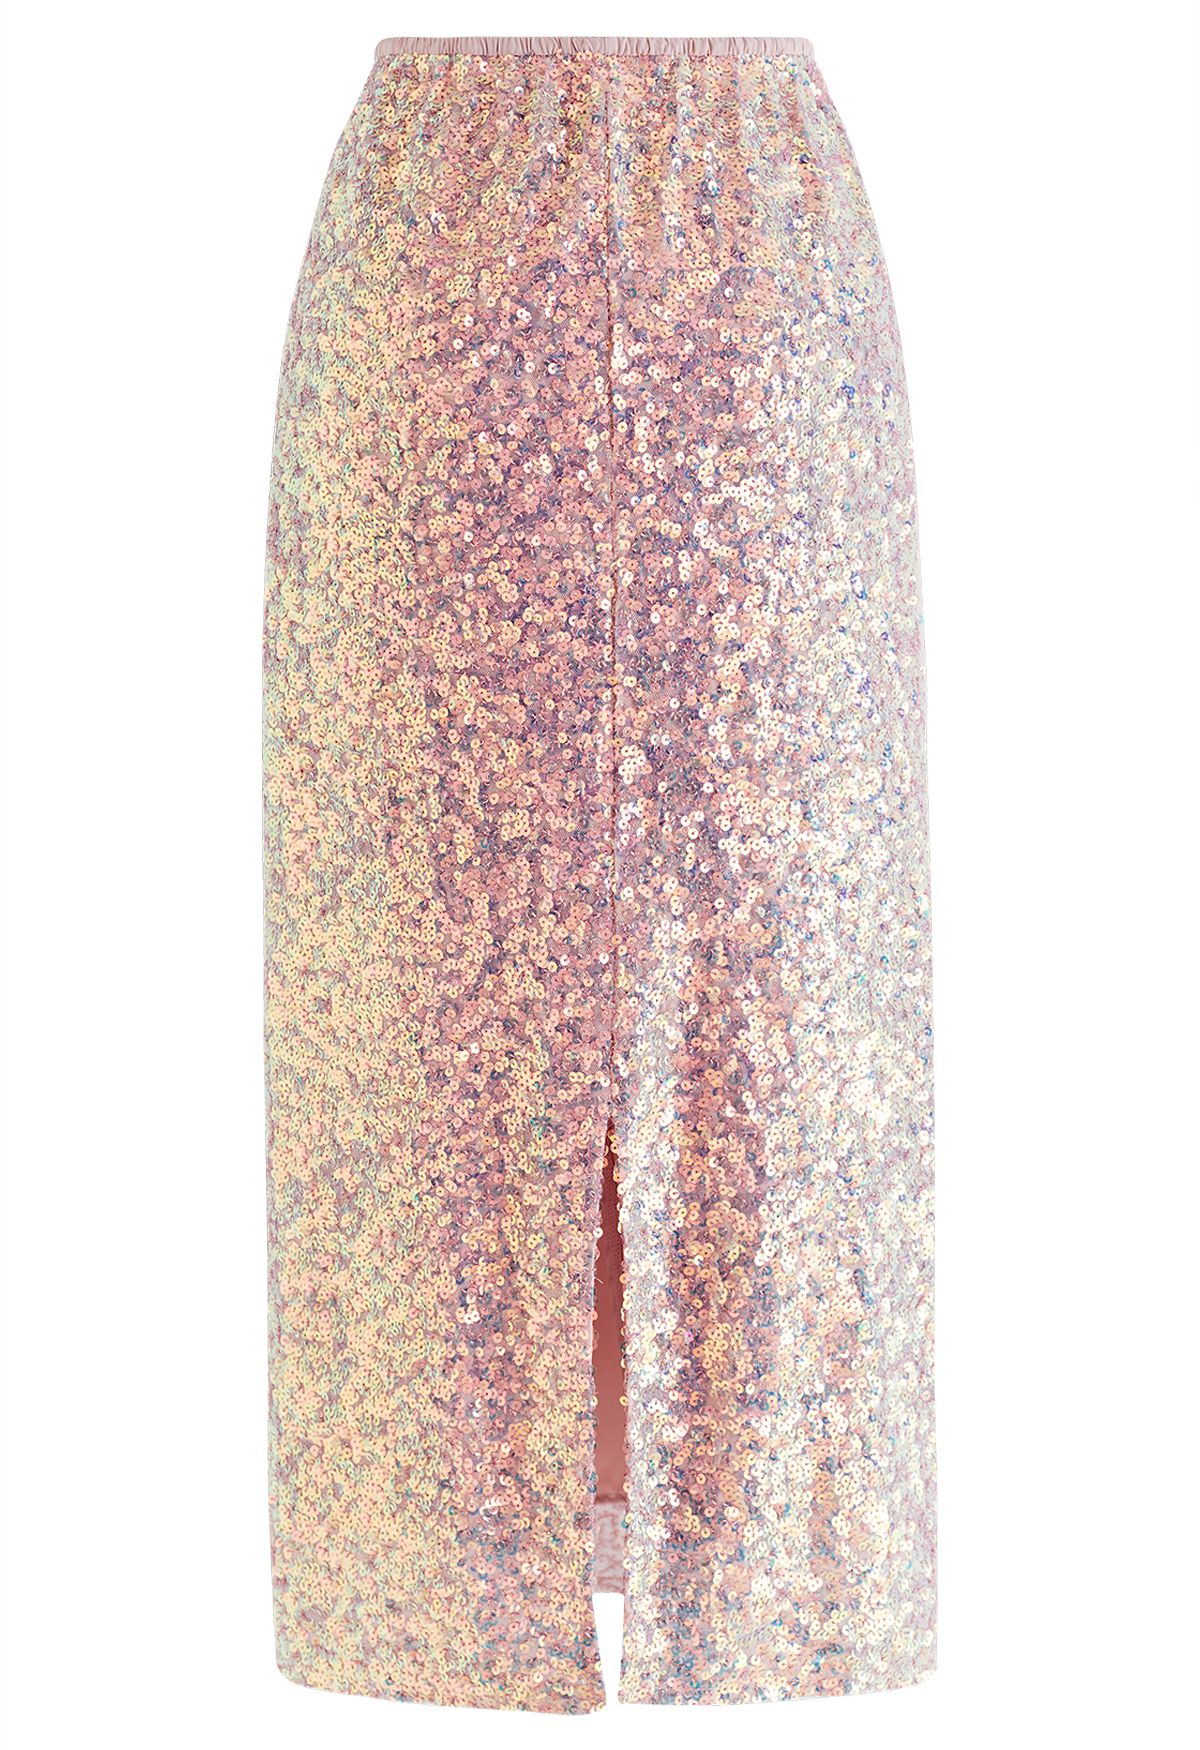 Iridescent Sequin Embellished Pencil Skirt in Pink - Retro, Indie